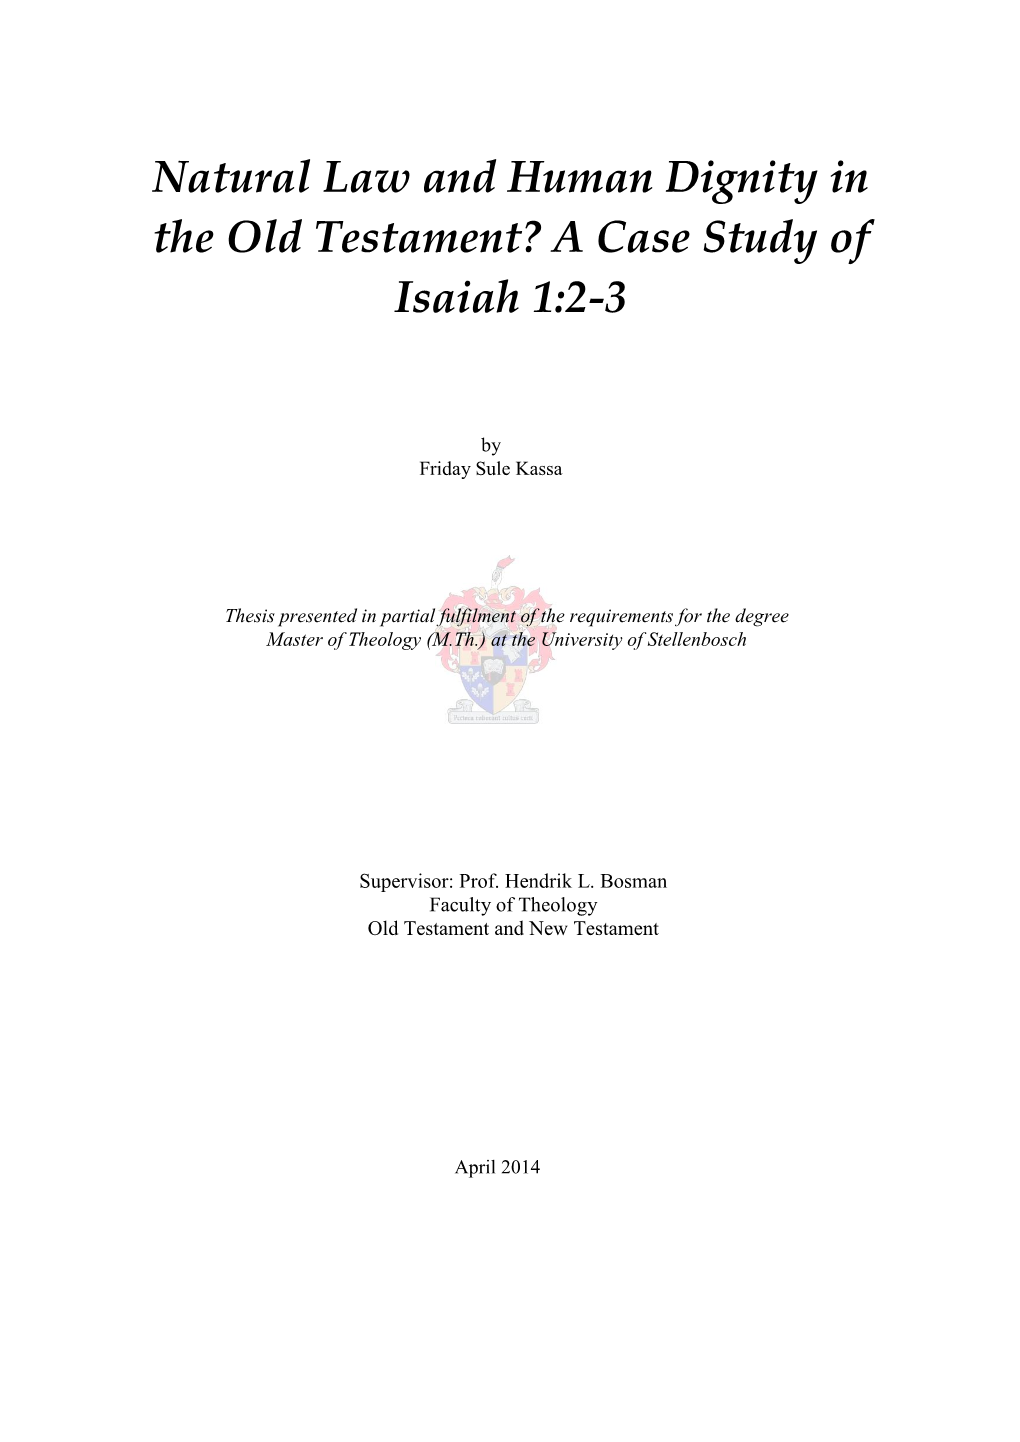 Natural Law and Human Dignity in the Old Testament? a Case Study of Isaiah 1:2-3